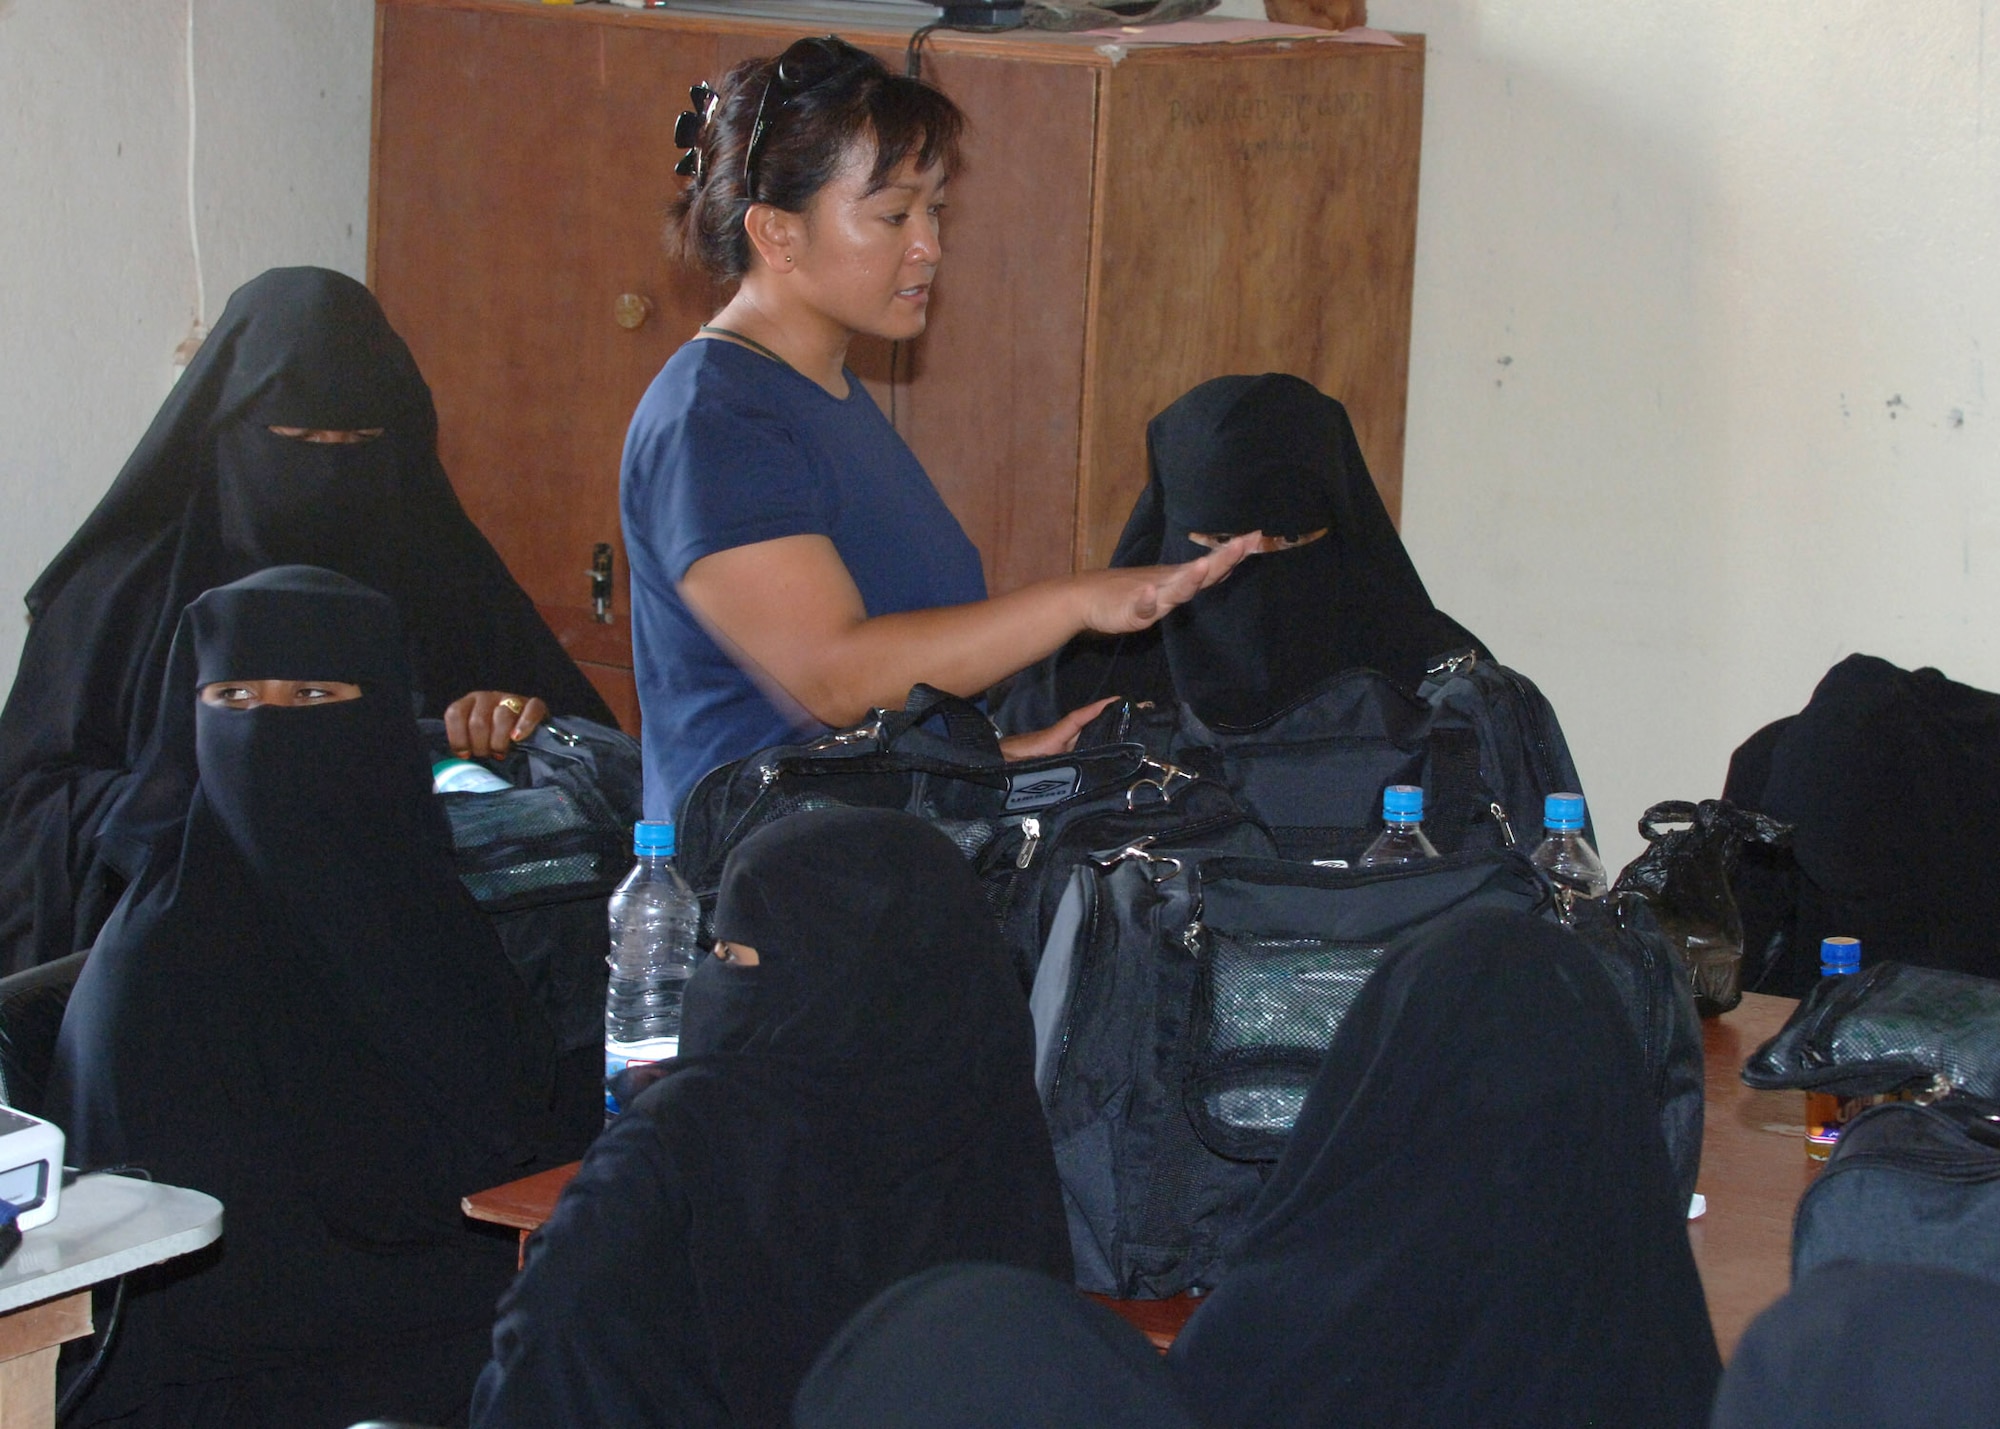 Air Force Maj. Pauline Lucas explains the contents of a veterinary bag as part of a Combined Joint Task Force-Horn of Africa veterinary civic action project on the island of Socotra, Yemen. The objective of the project was to teach women on the island basic animal husbandry techniques. Those learned skills will be used to improve the country's overall livestock health and productivity, as well as educate others villagers. Major Lucas is a CJTF-HOA public health officer. (U.S. Air Force photo/Tech. Sgt. Carrie Bernard) 